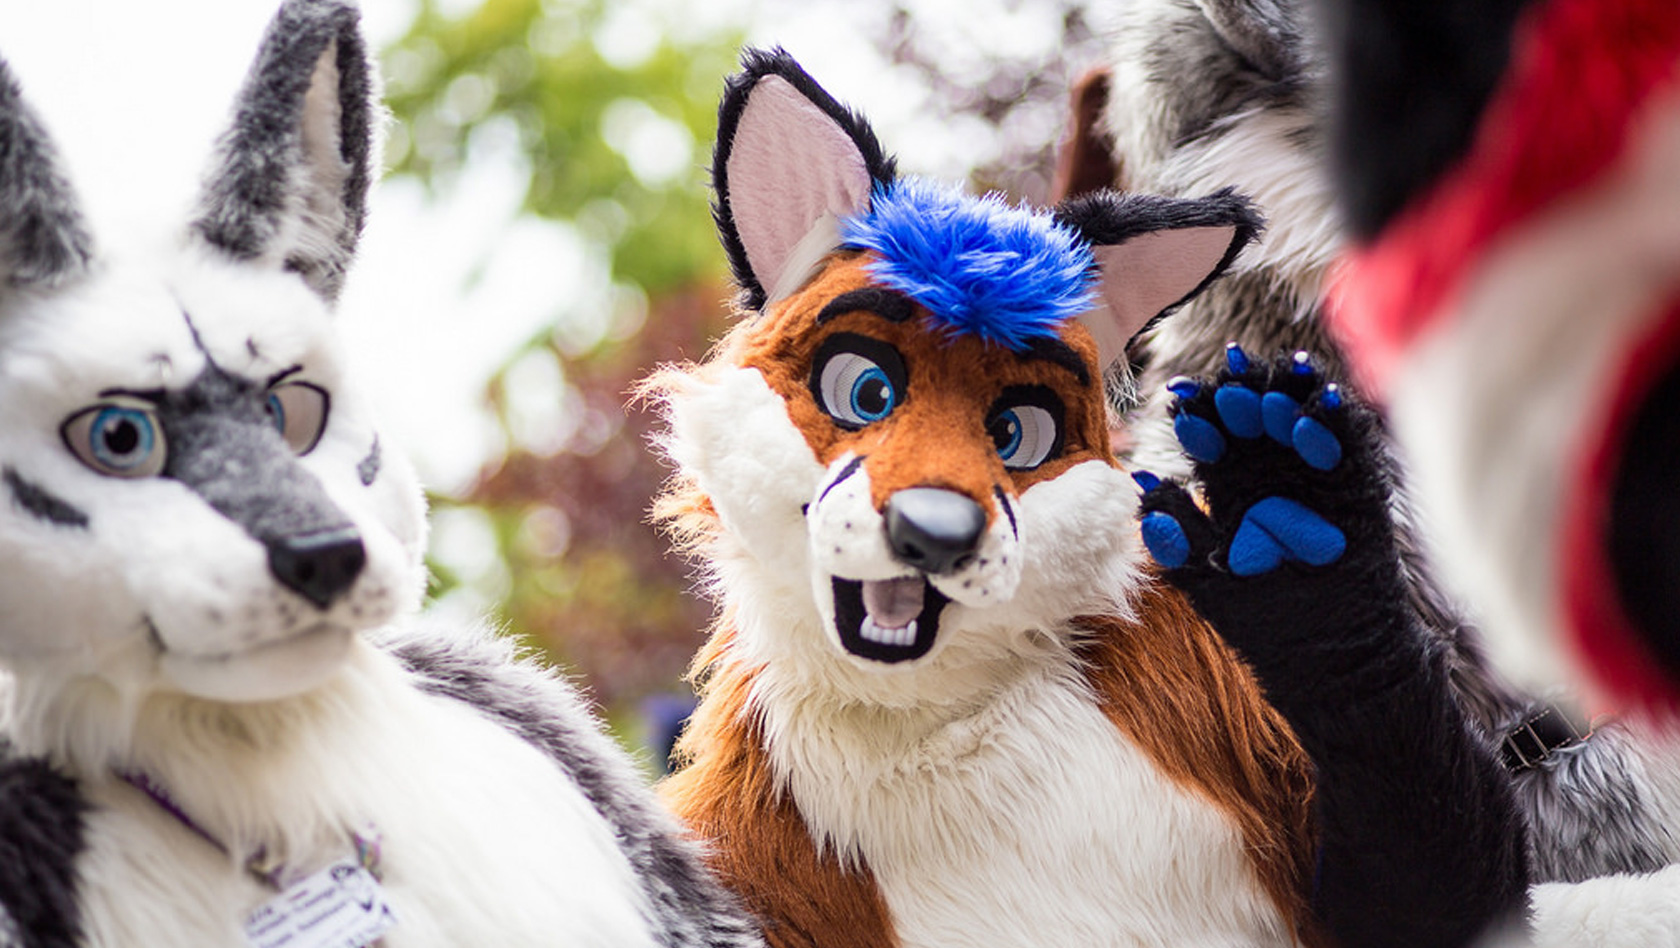 New Data Shows Furries Are Rapidly Growing in Number - But 